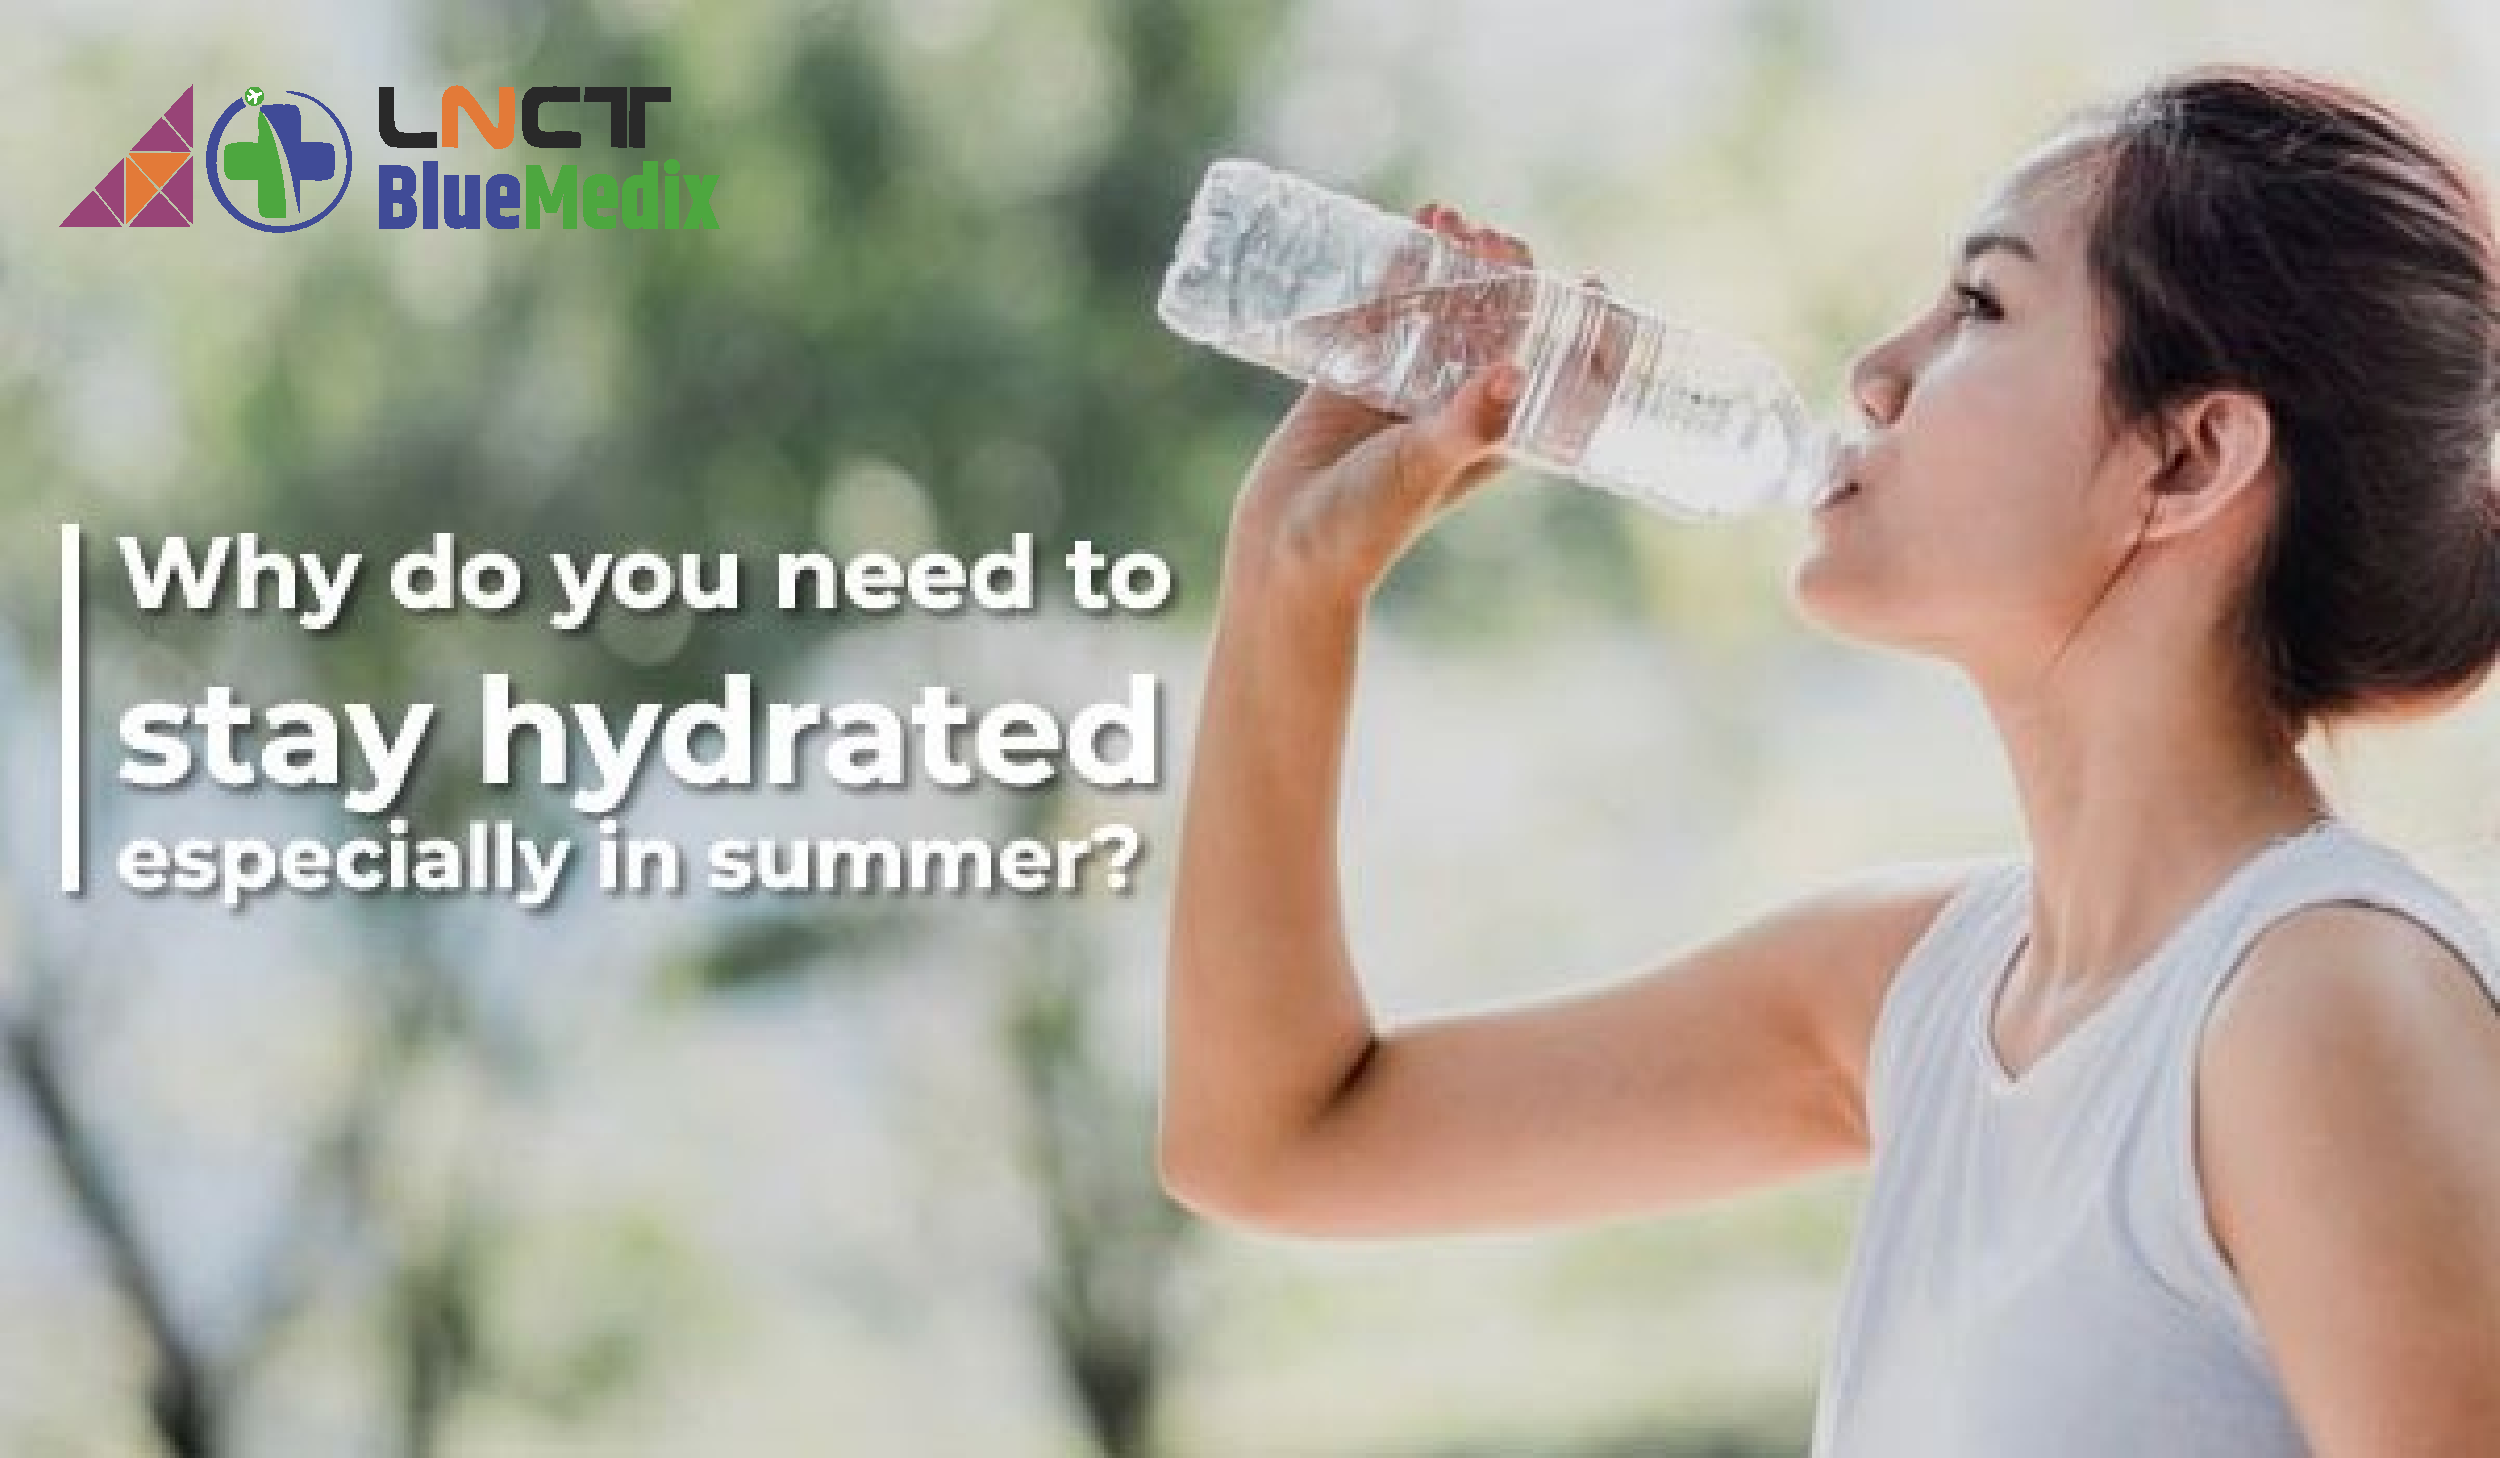 Why do you need to stay hydrated especially in summer?